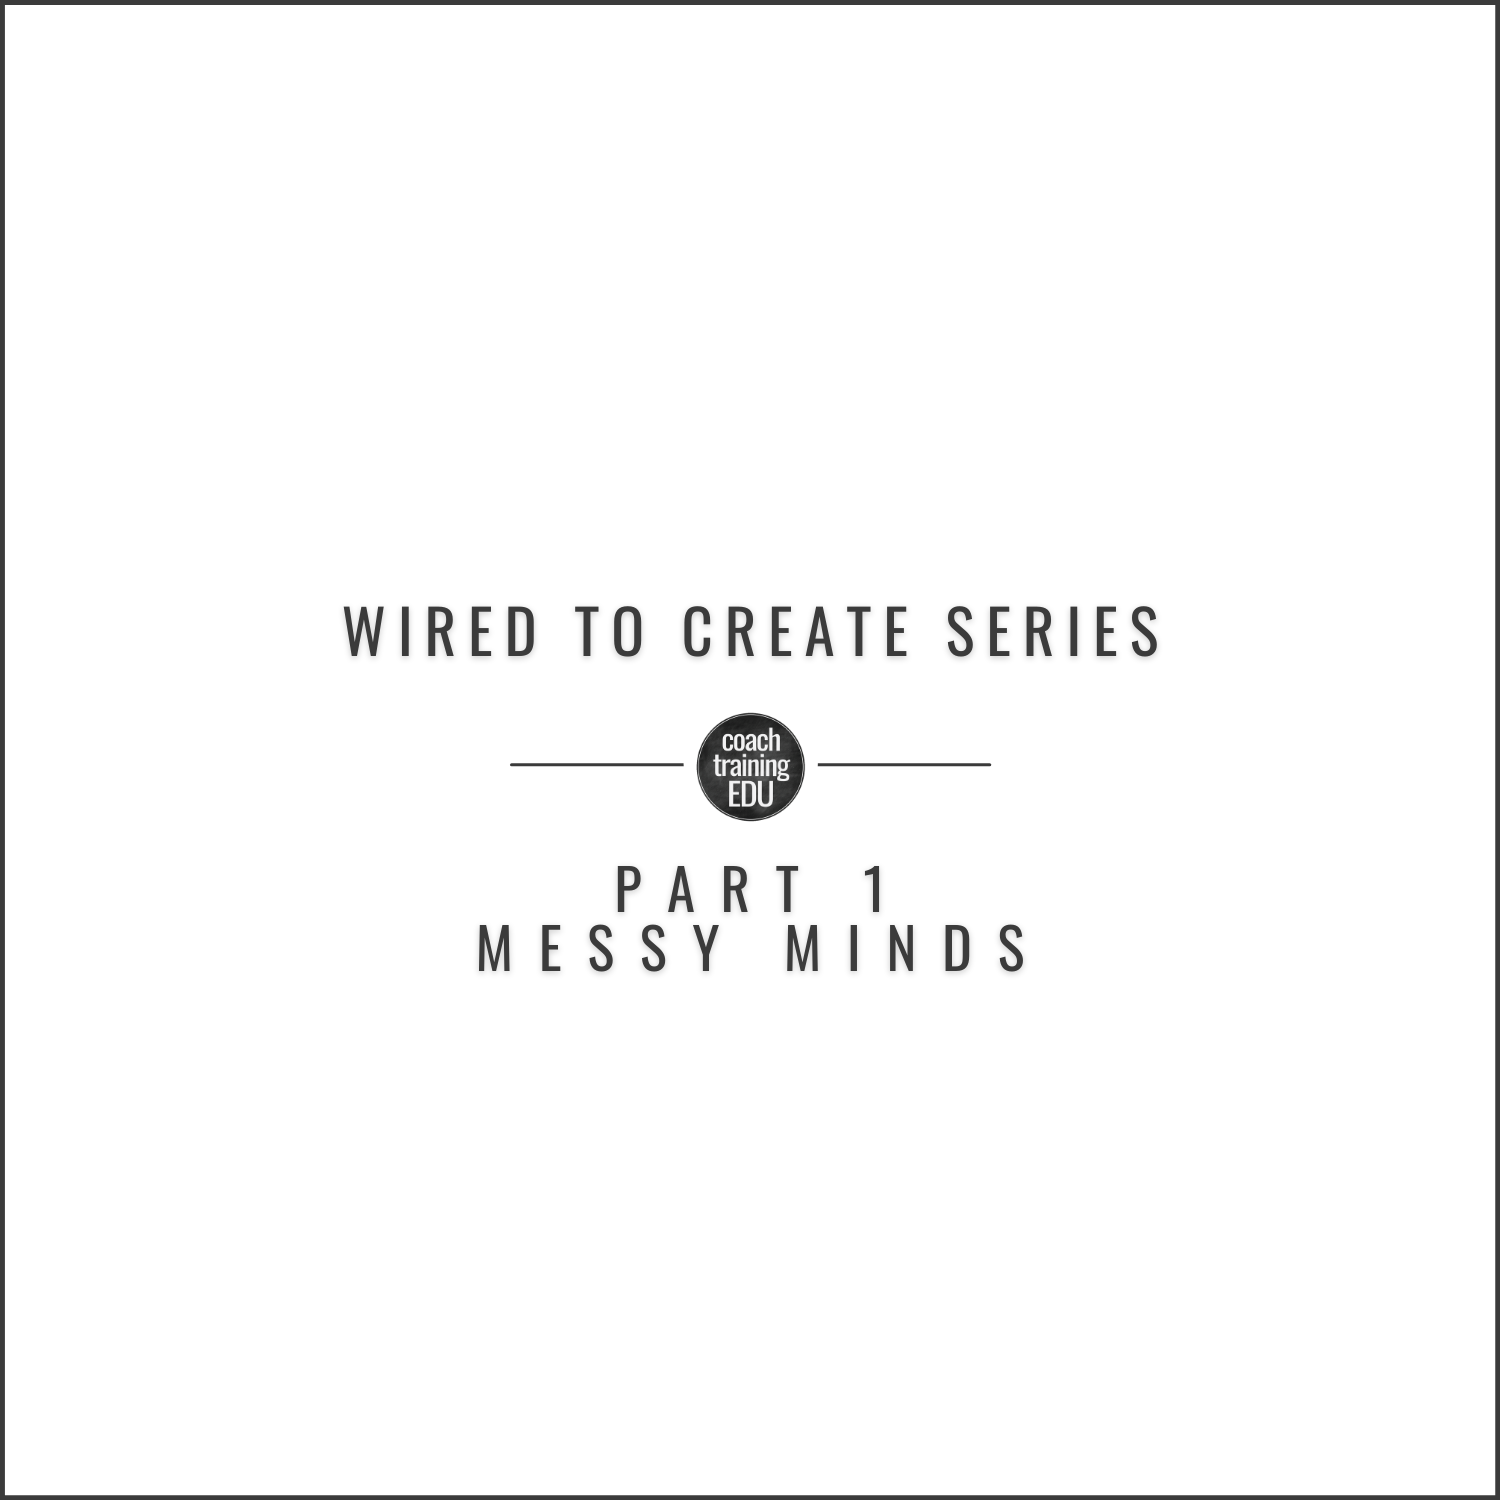 Wired to Create Series
Part 1:  Messy Minds 